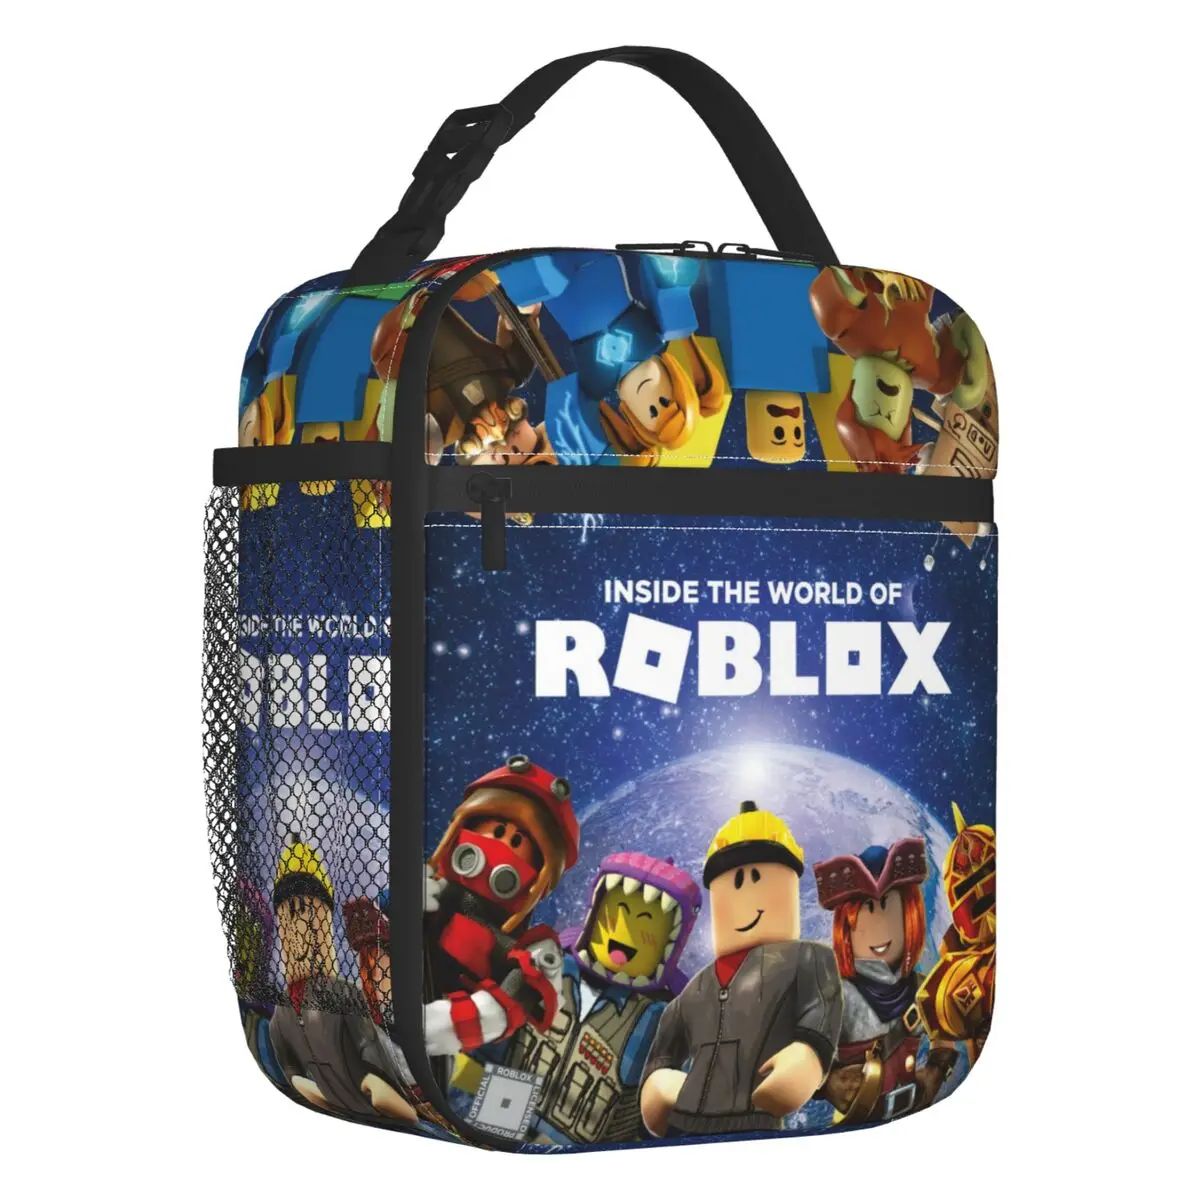 Robloxs Insulated Lunch Tote Bag for Women Cartoon Anime Game Resuable Thermal Cooler Bento Box School